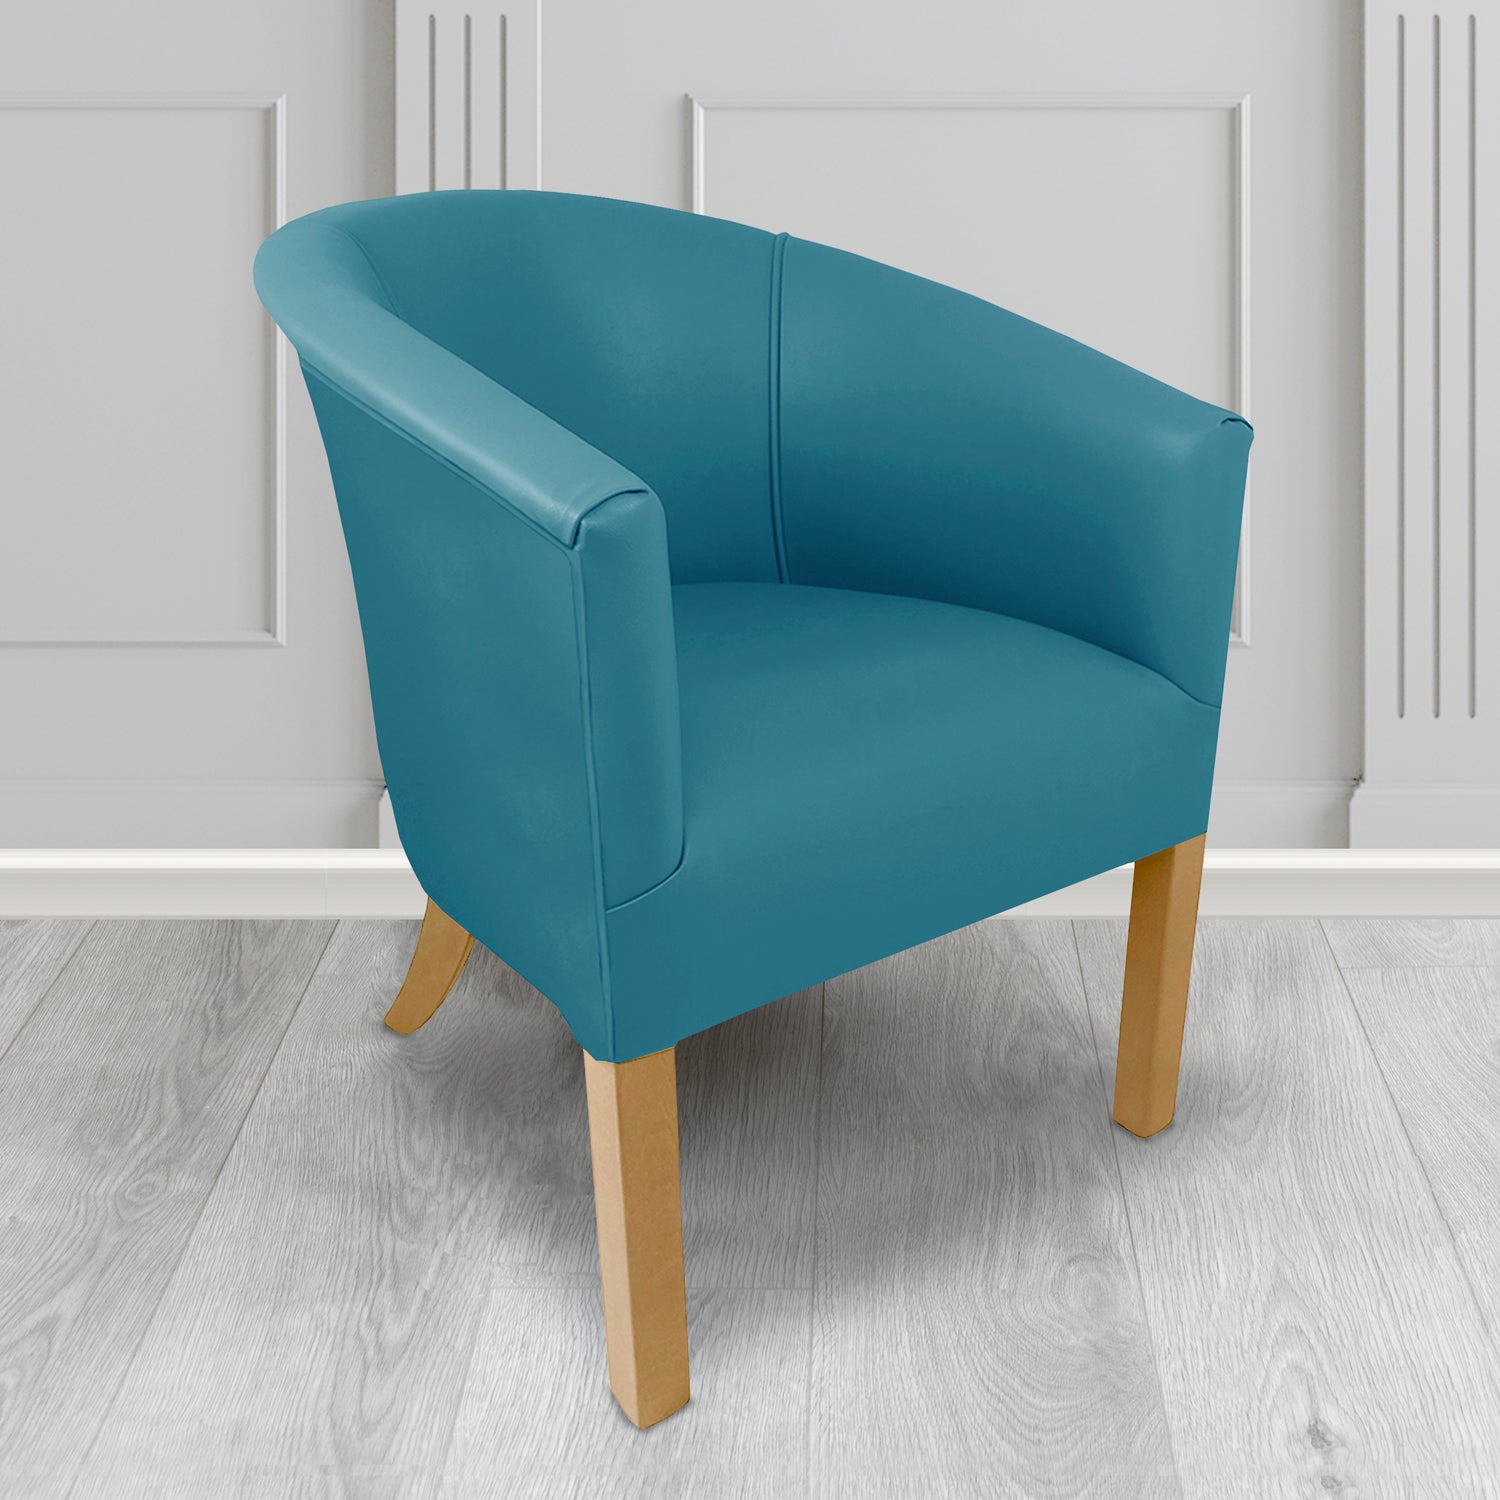 Lewisham Tub Chair in Agua Paint Pot Teal Crib 5 Faux Leather - Antimicrobial, Stain Resistant & Waterproof - The Tub Chair Shop